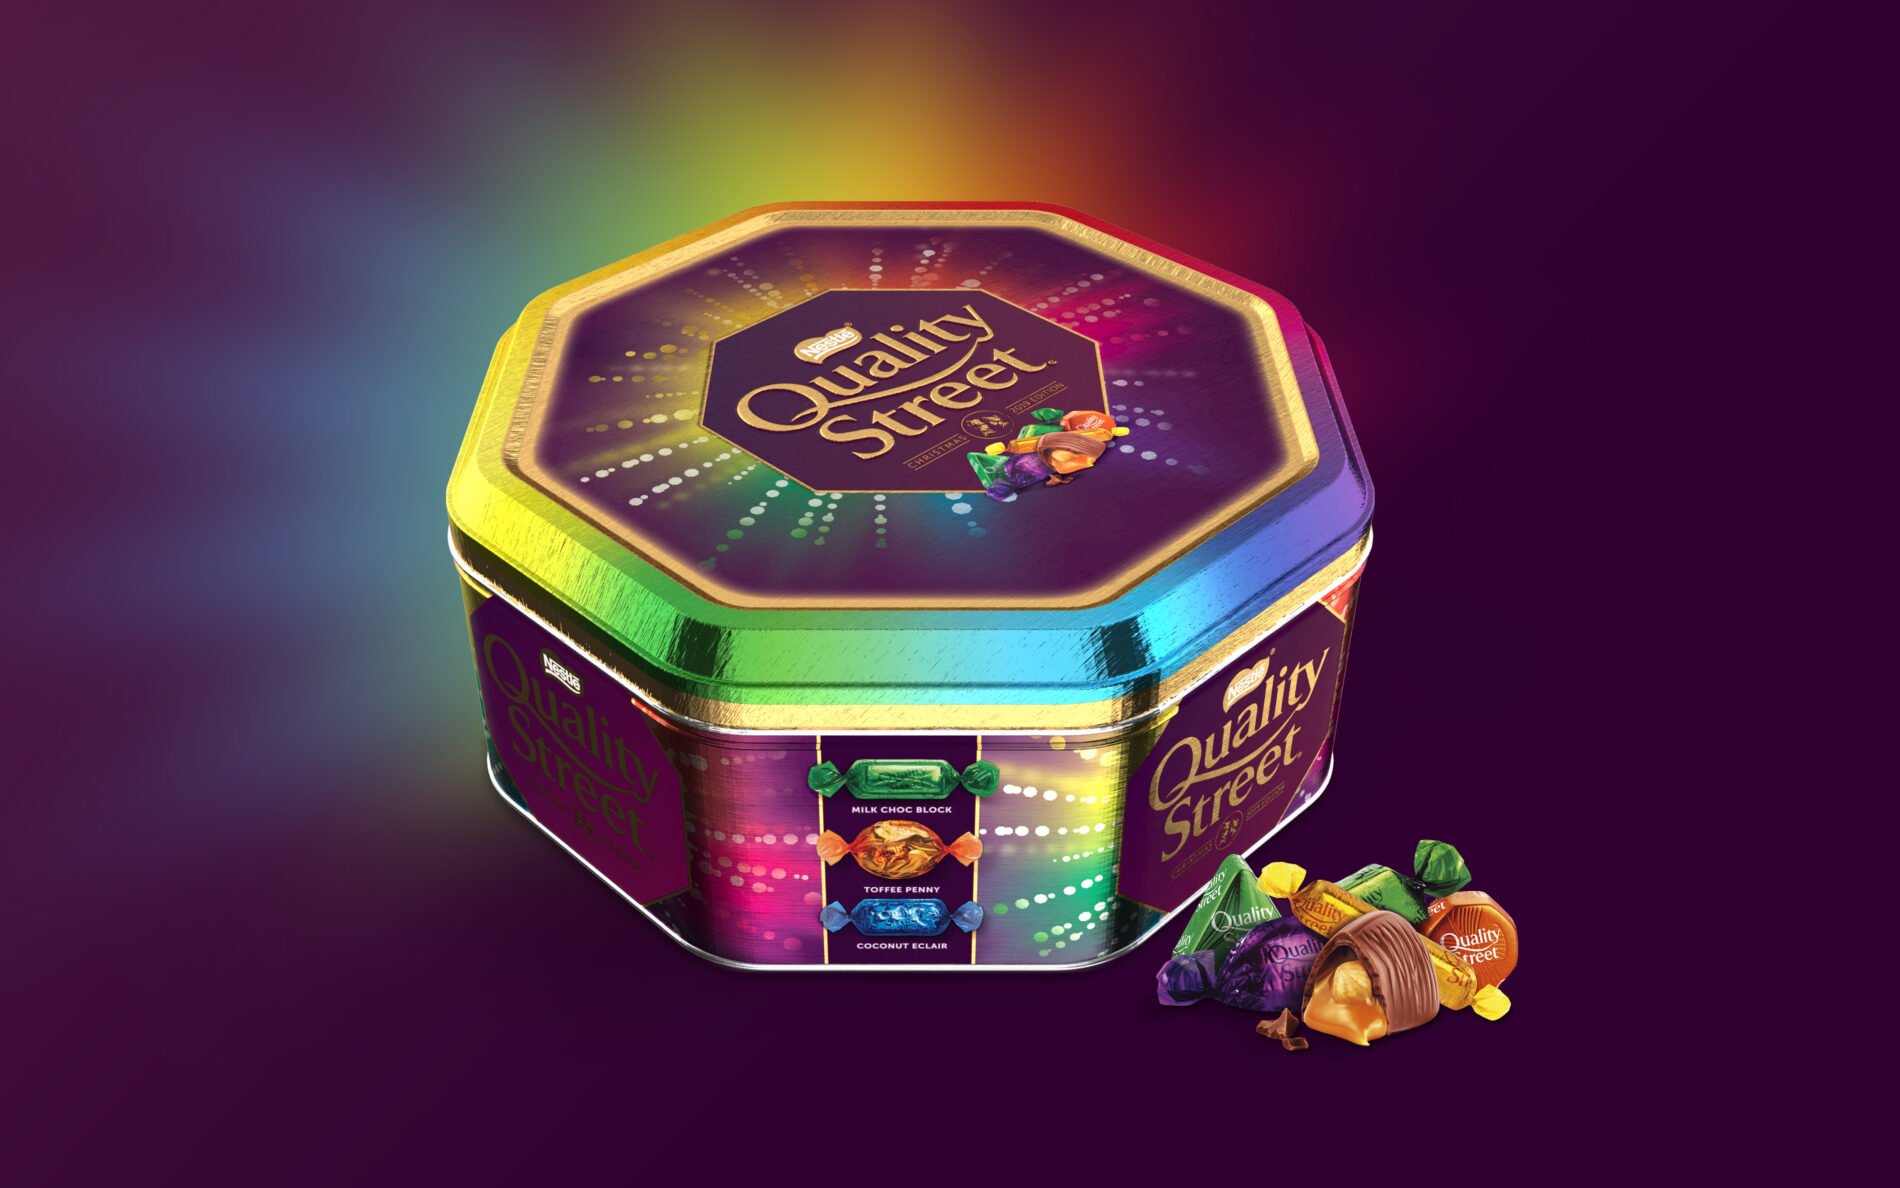 Quality Street - 3D images